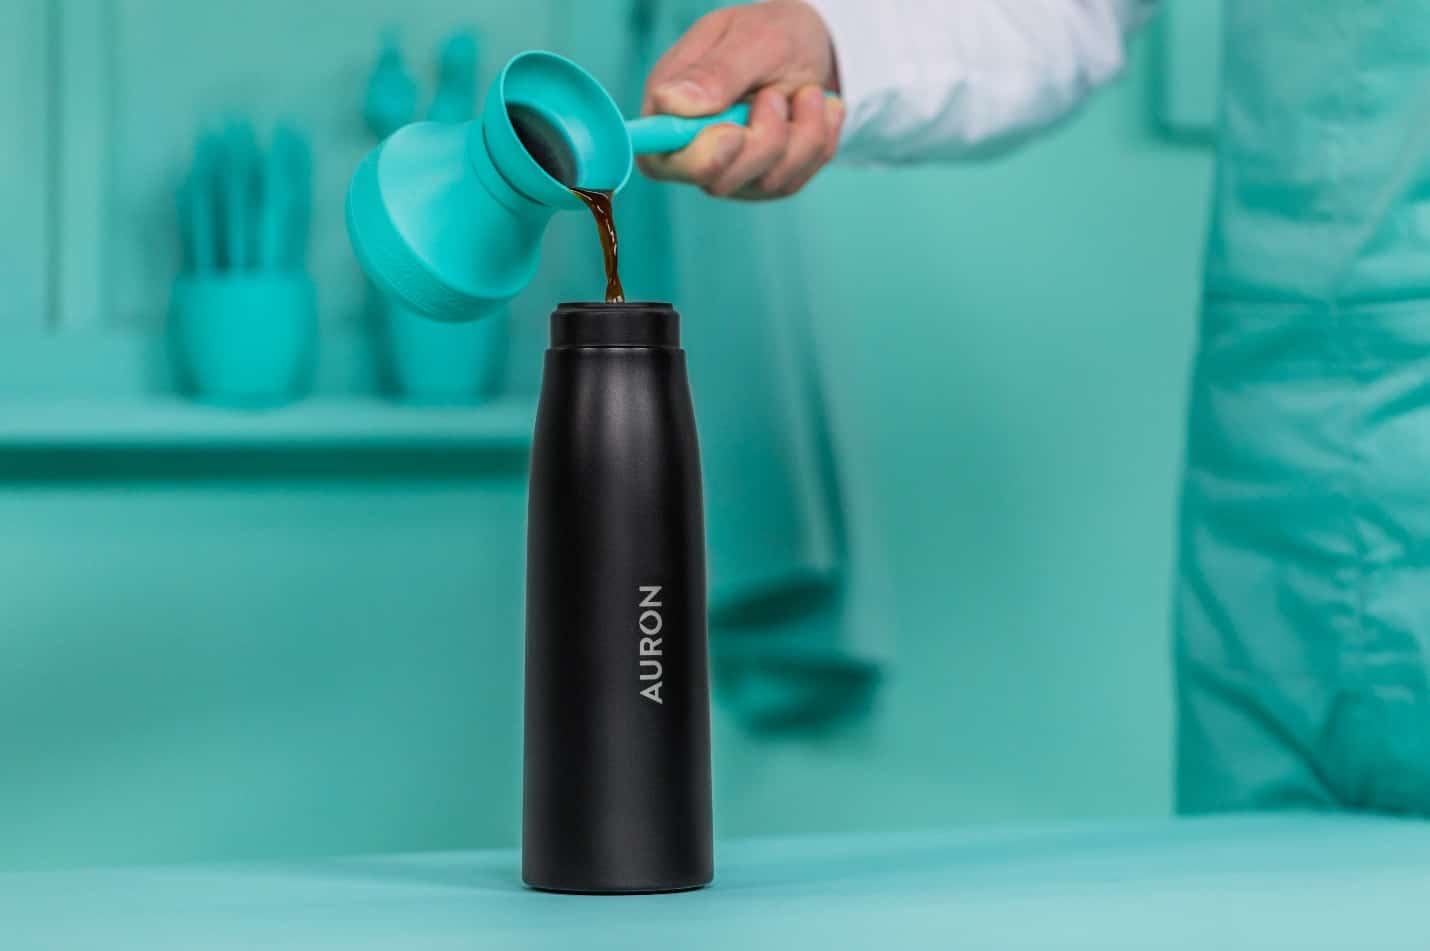 Auron: Self-cleaning water purifying UV-C smart bottle